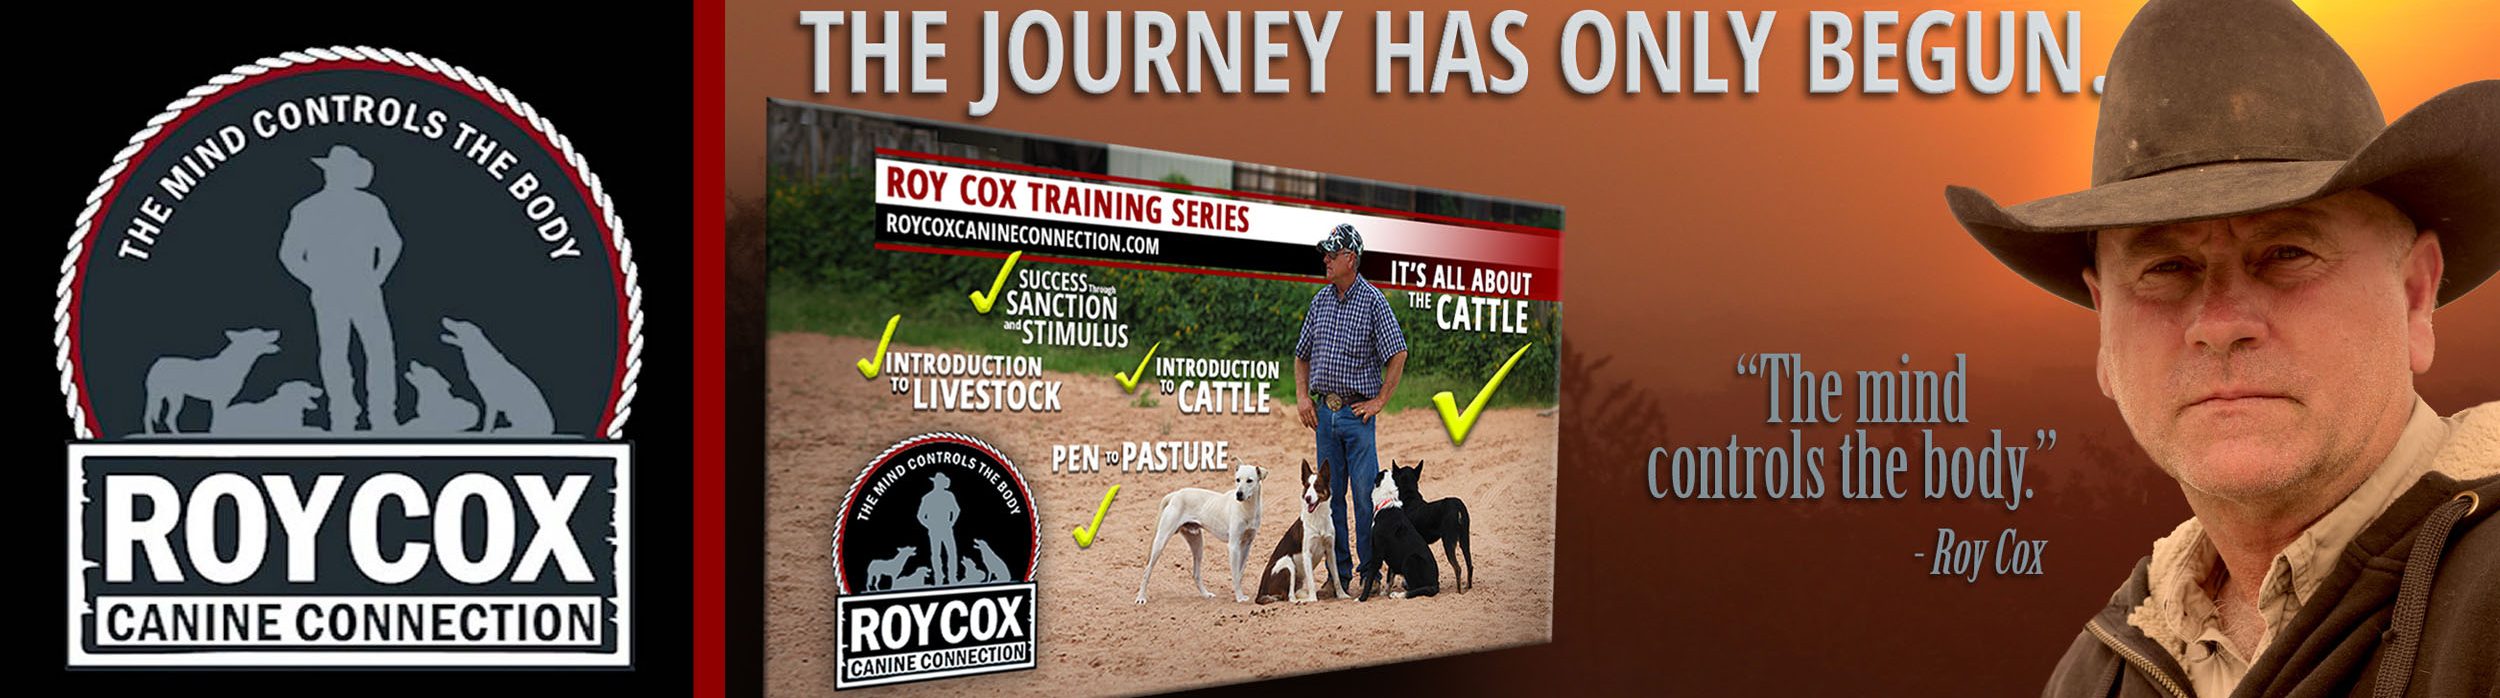 Roy Cox Canine Connection